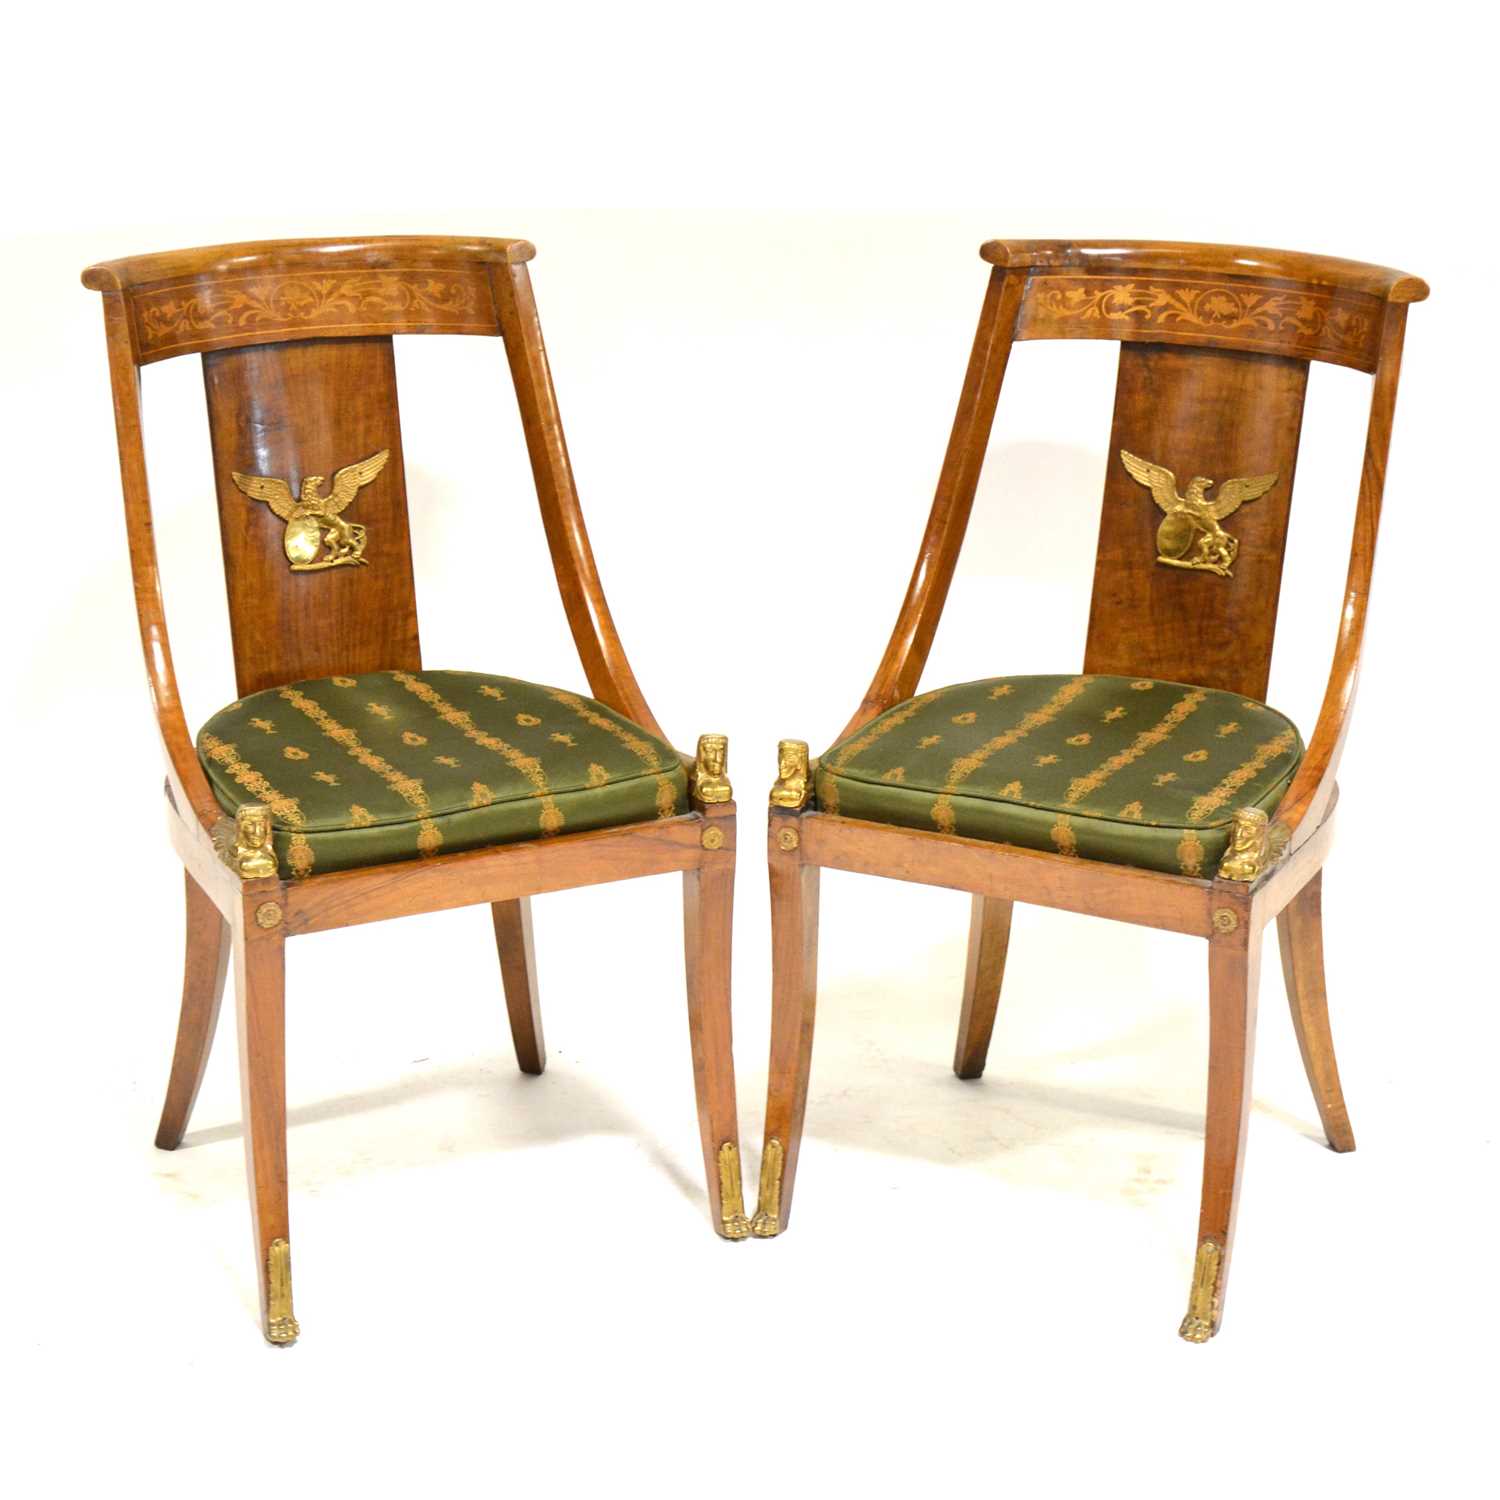 Pair of French Empire style chairs,